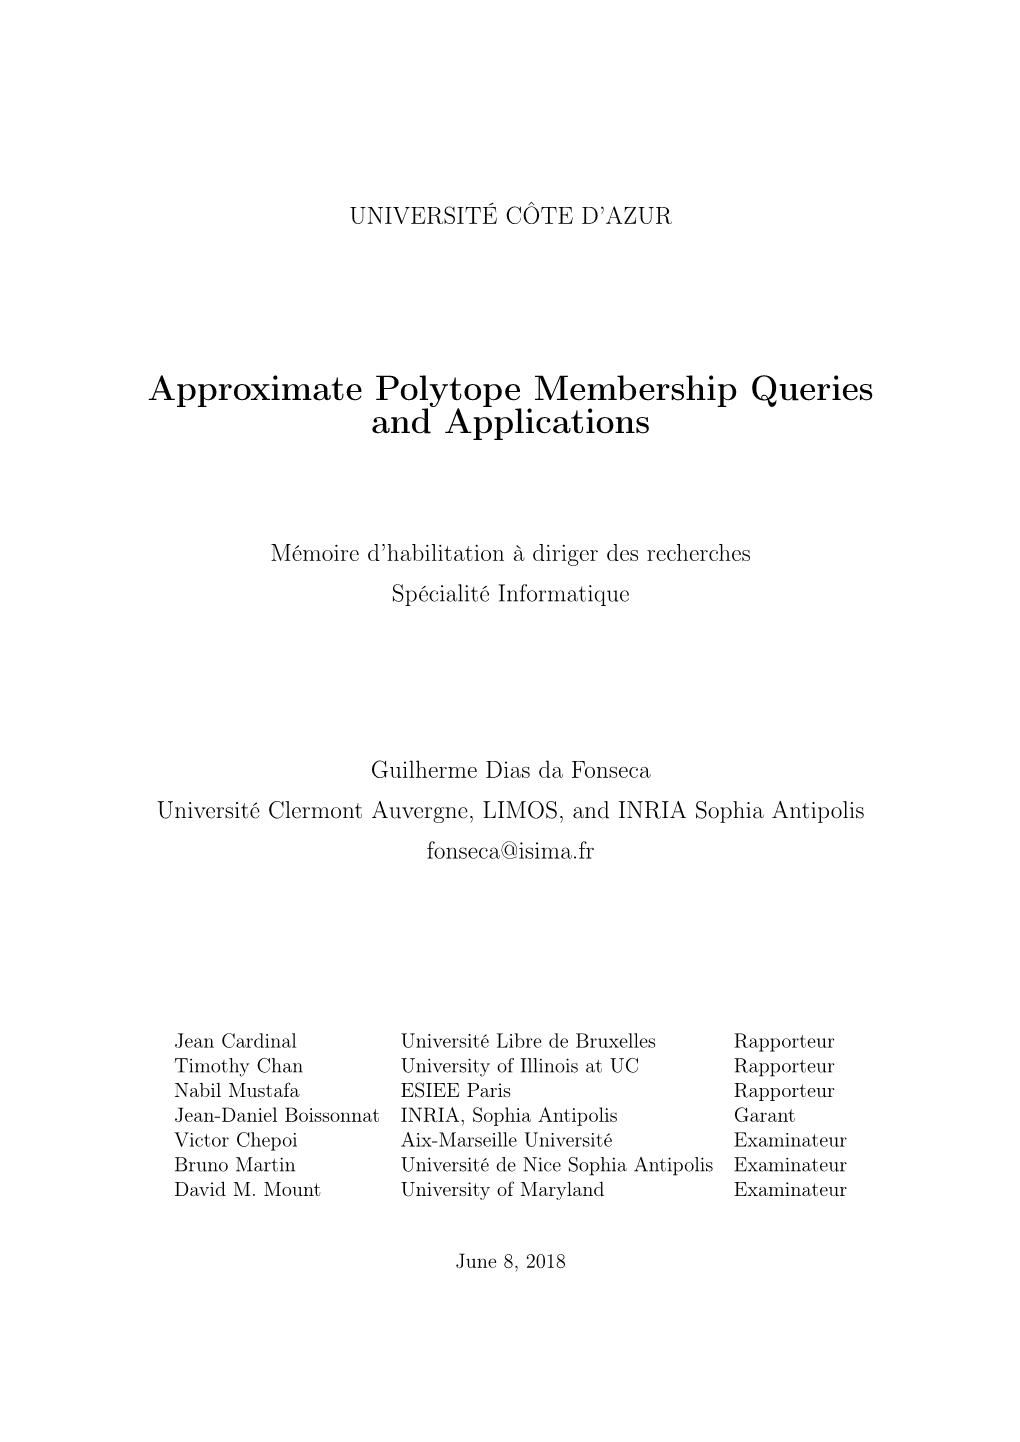 Approximate Polytope Membership Queries and Applications